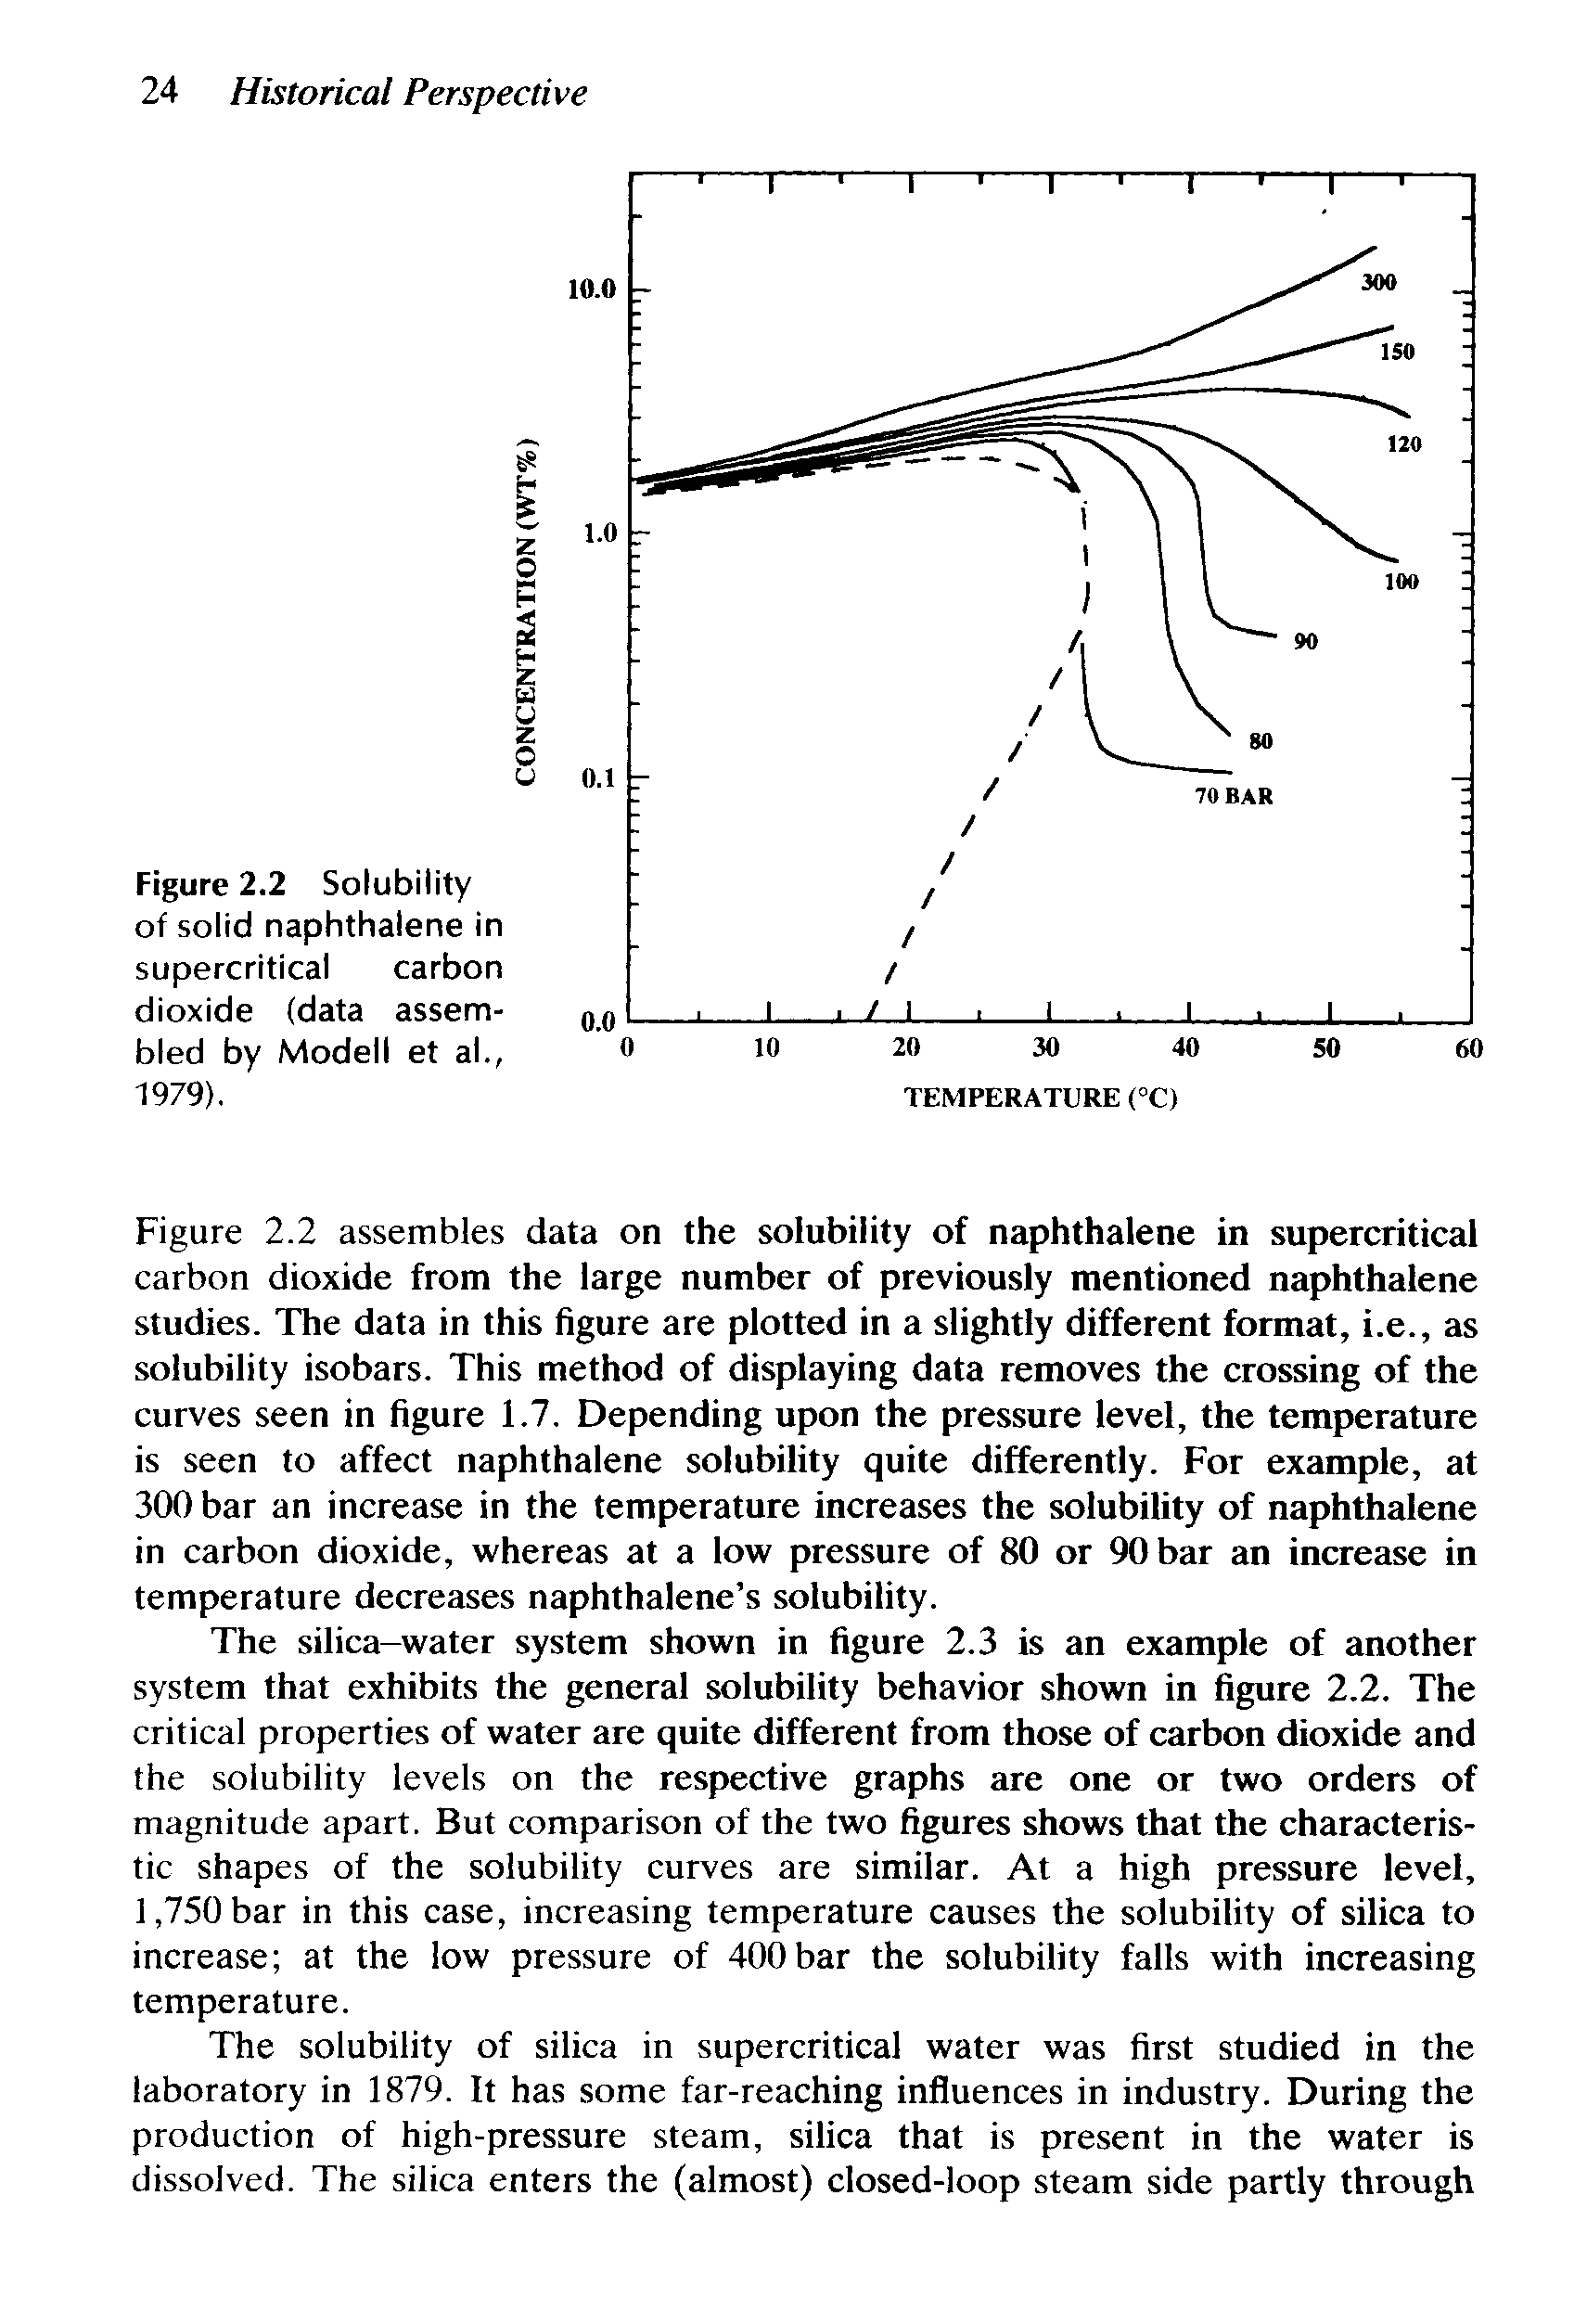 Figure 2.2 Solubility of solid naphthalene in supercritical carbon dioxide (data assembled by Modell et al., 1979).